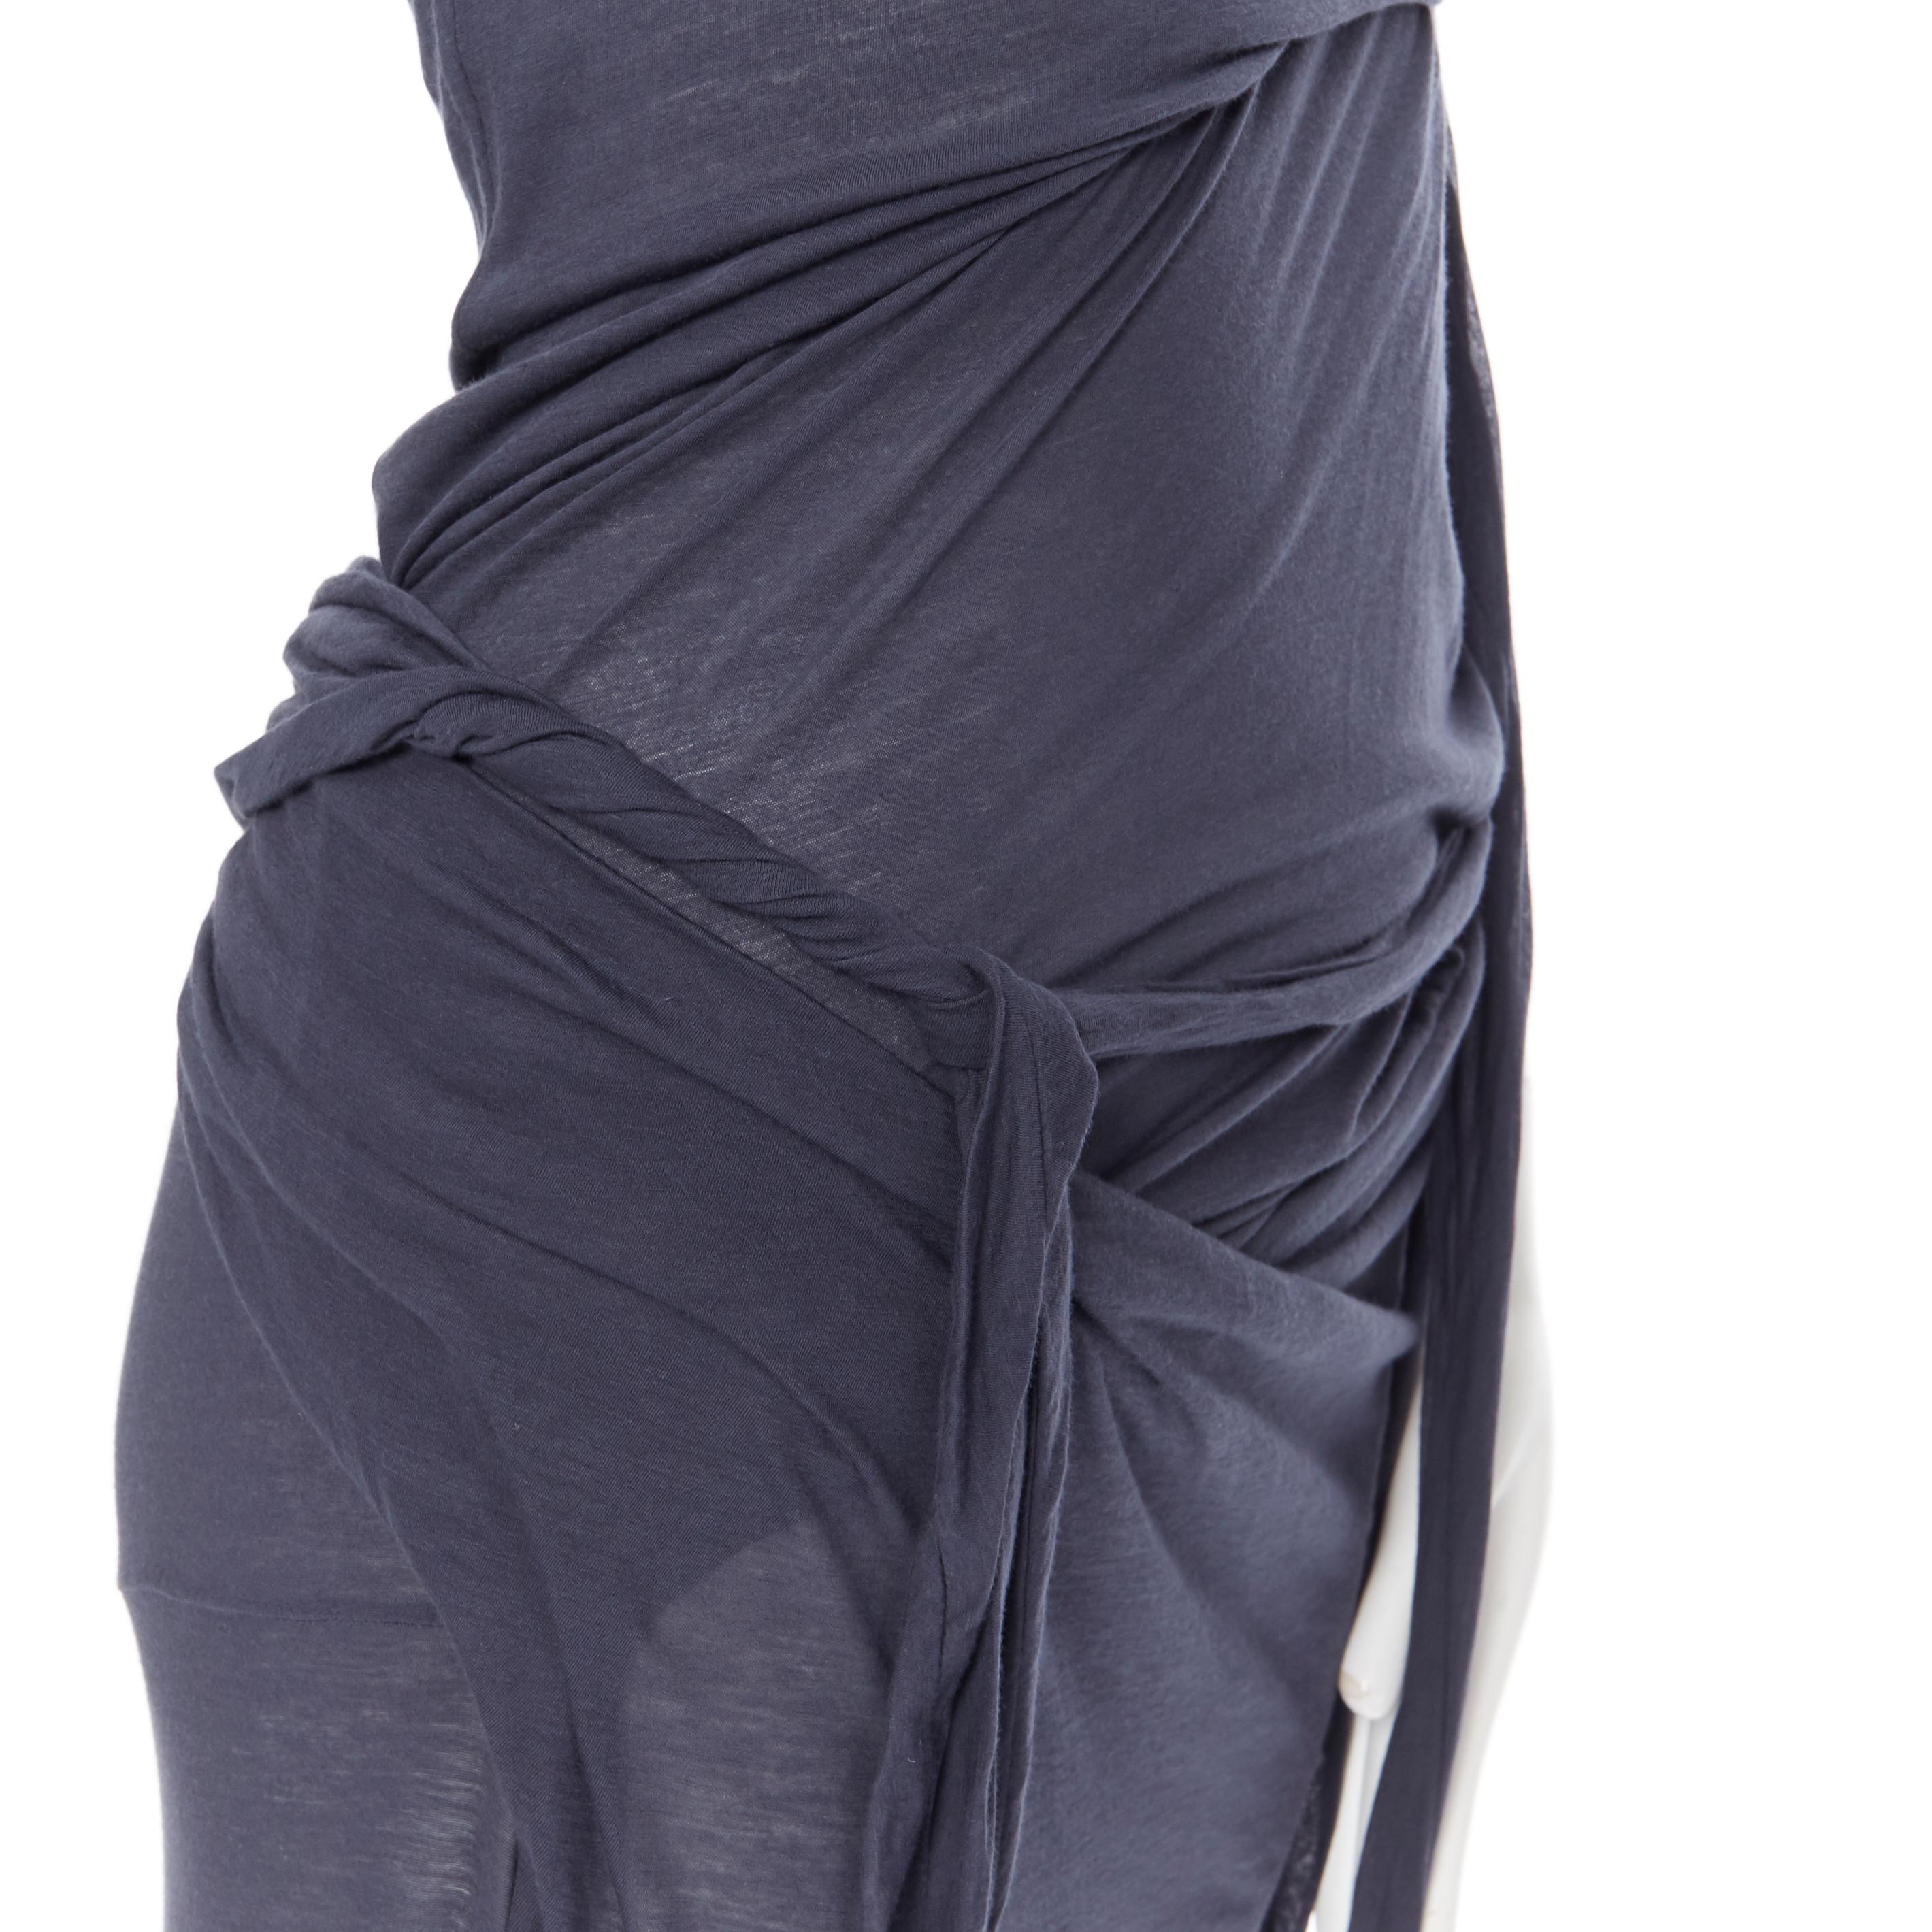 new DRKSHDW RICK OWENS navy grey cotton jersey tie knot drape bias maxi dress L
Brand: Rick Owens
Designer: Rick Owens
Collection: Spring Summer 2018
Model Name / Style: Tie Knot dress
Material: Cotton
Color: Navy; dark graphite grey
Pattern: